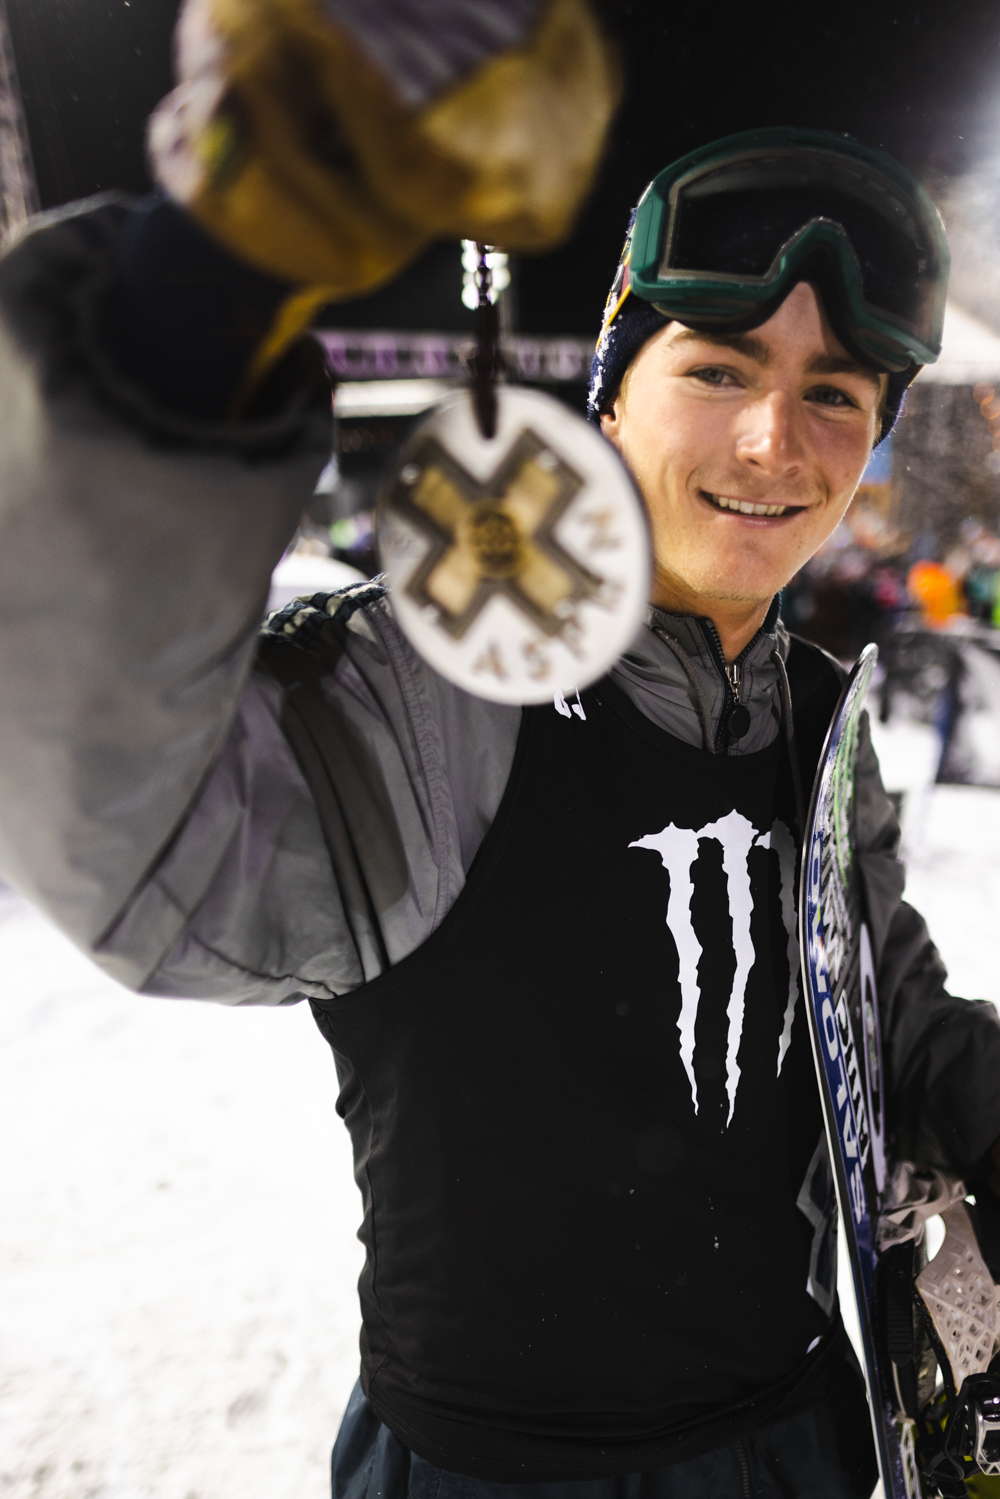 Monster Energy's Dusty Henricksen Will Compete in Men's Snowboard Slopestyle, Big Air and Knuckle Huck at X Games Aspen 2023